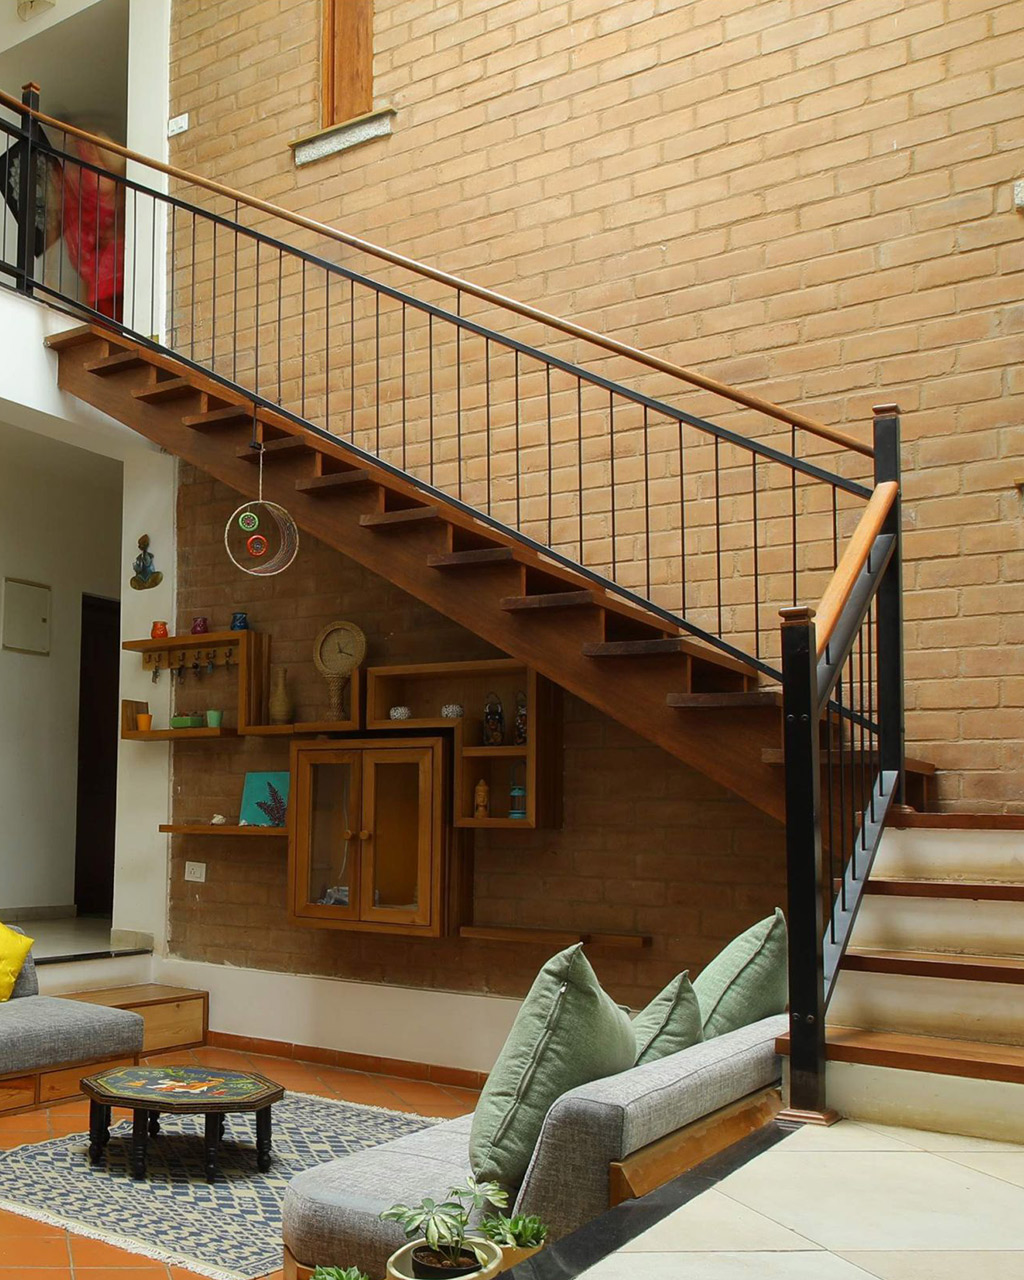 Timber staircase with metal railing and concrete mid landing